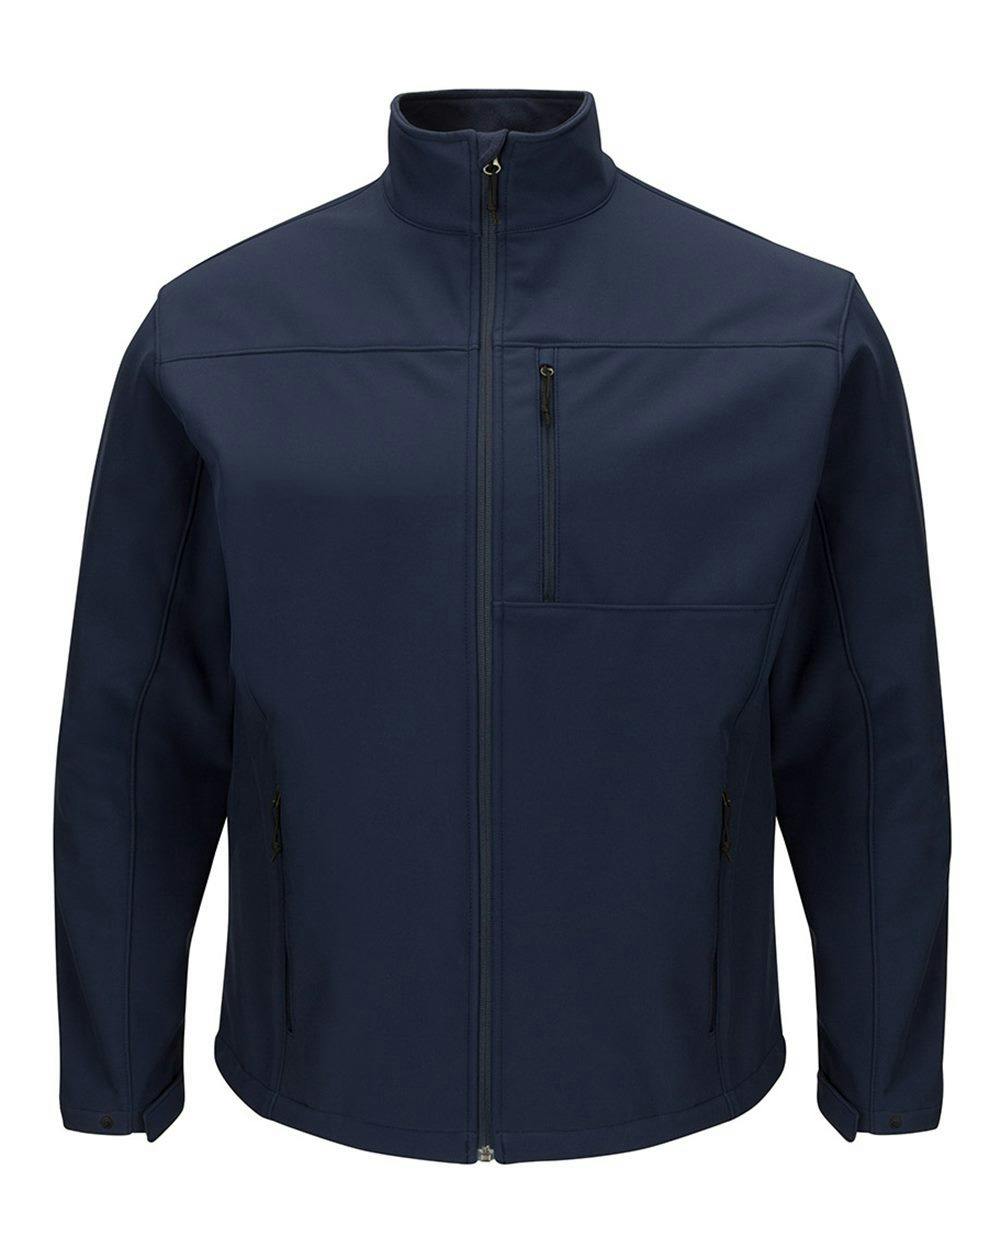 Image for Deluxe Soft Shell Jacket - JP68